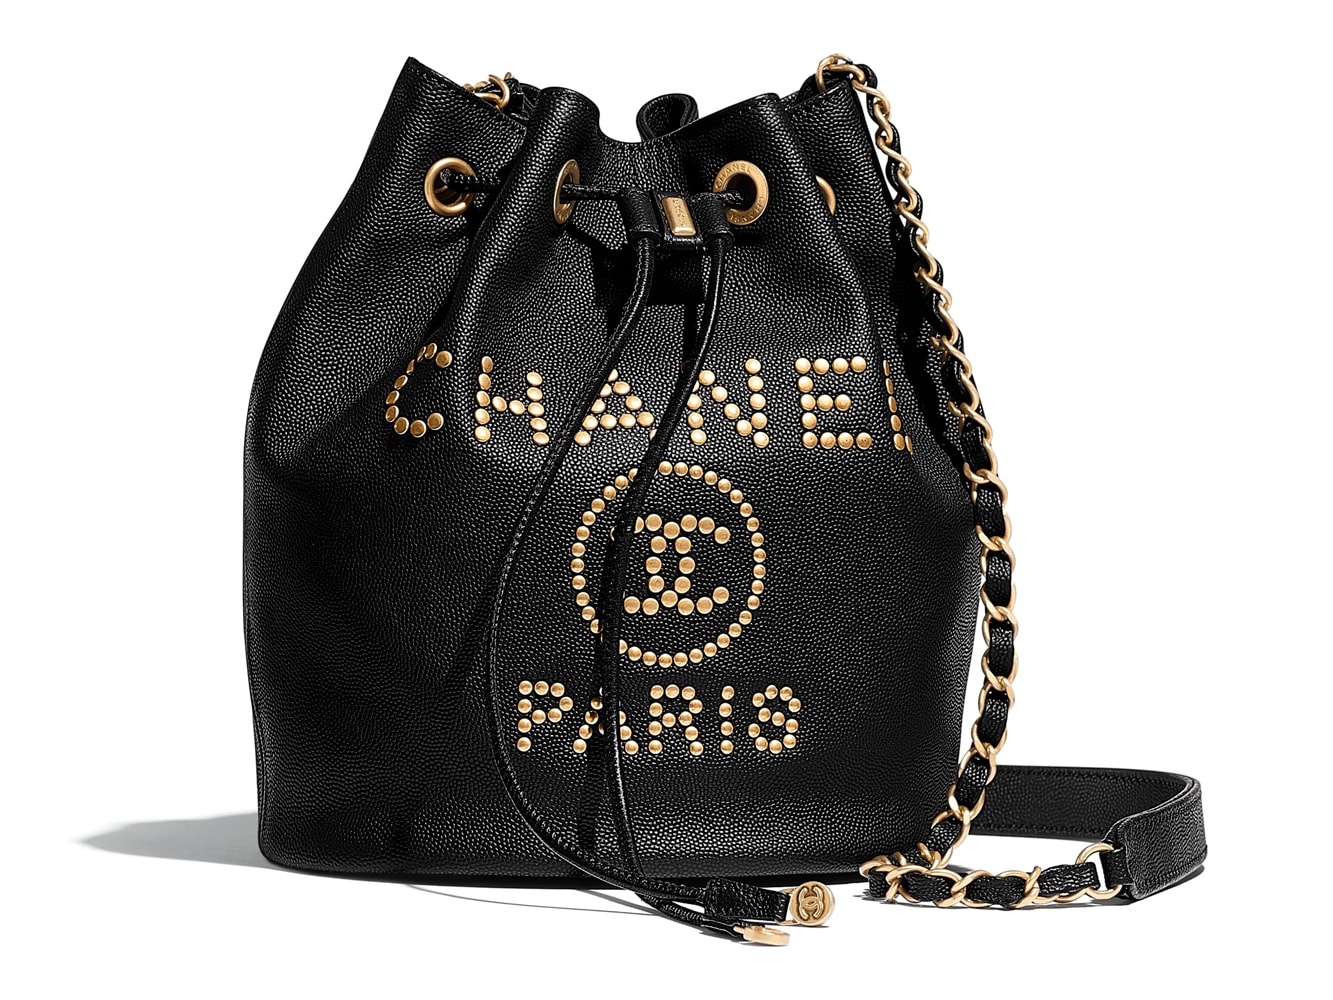 We've Got Over 100 Pics + Prices of Chanel's Nautical-Inspired